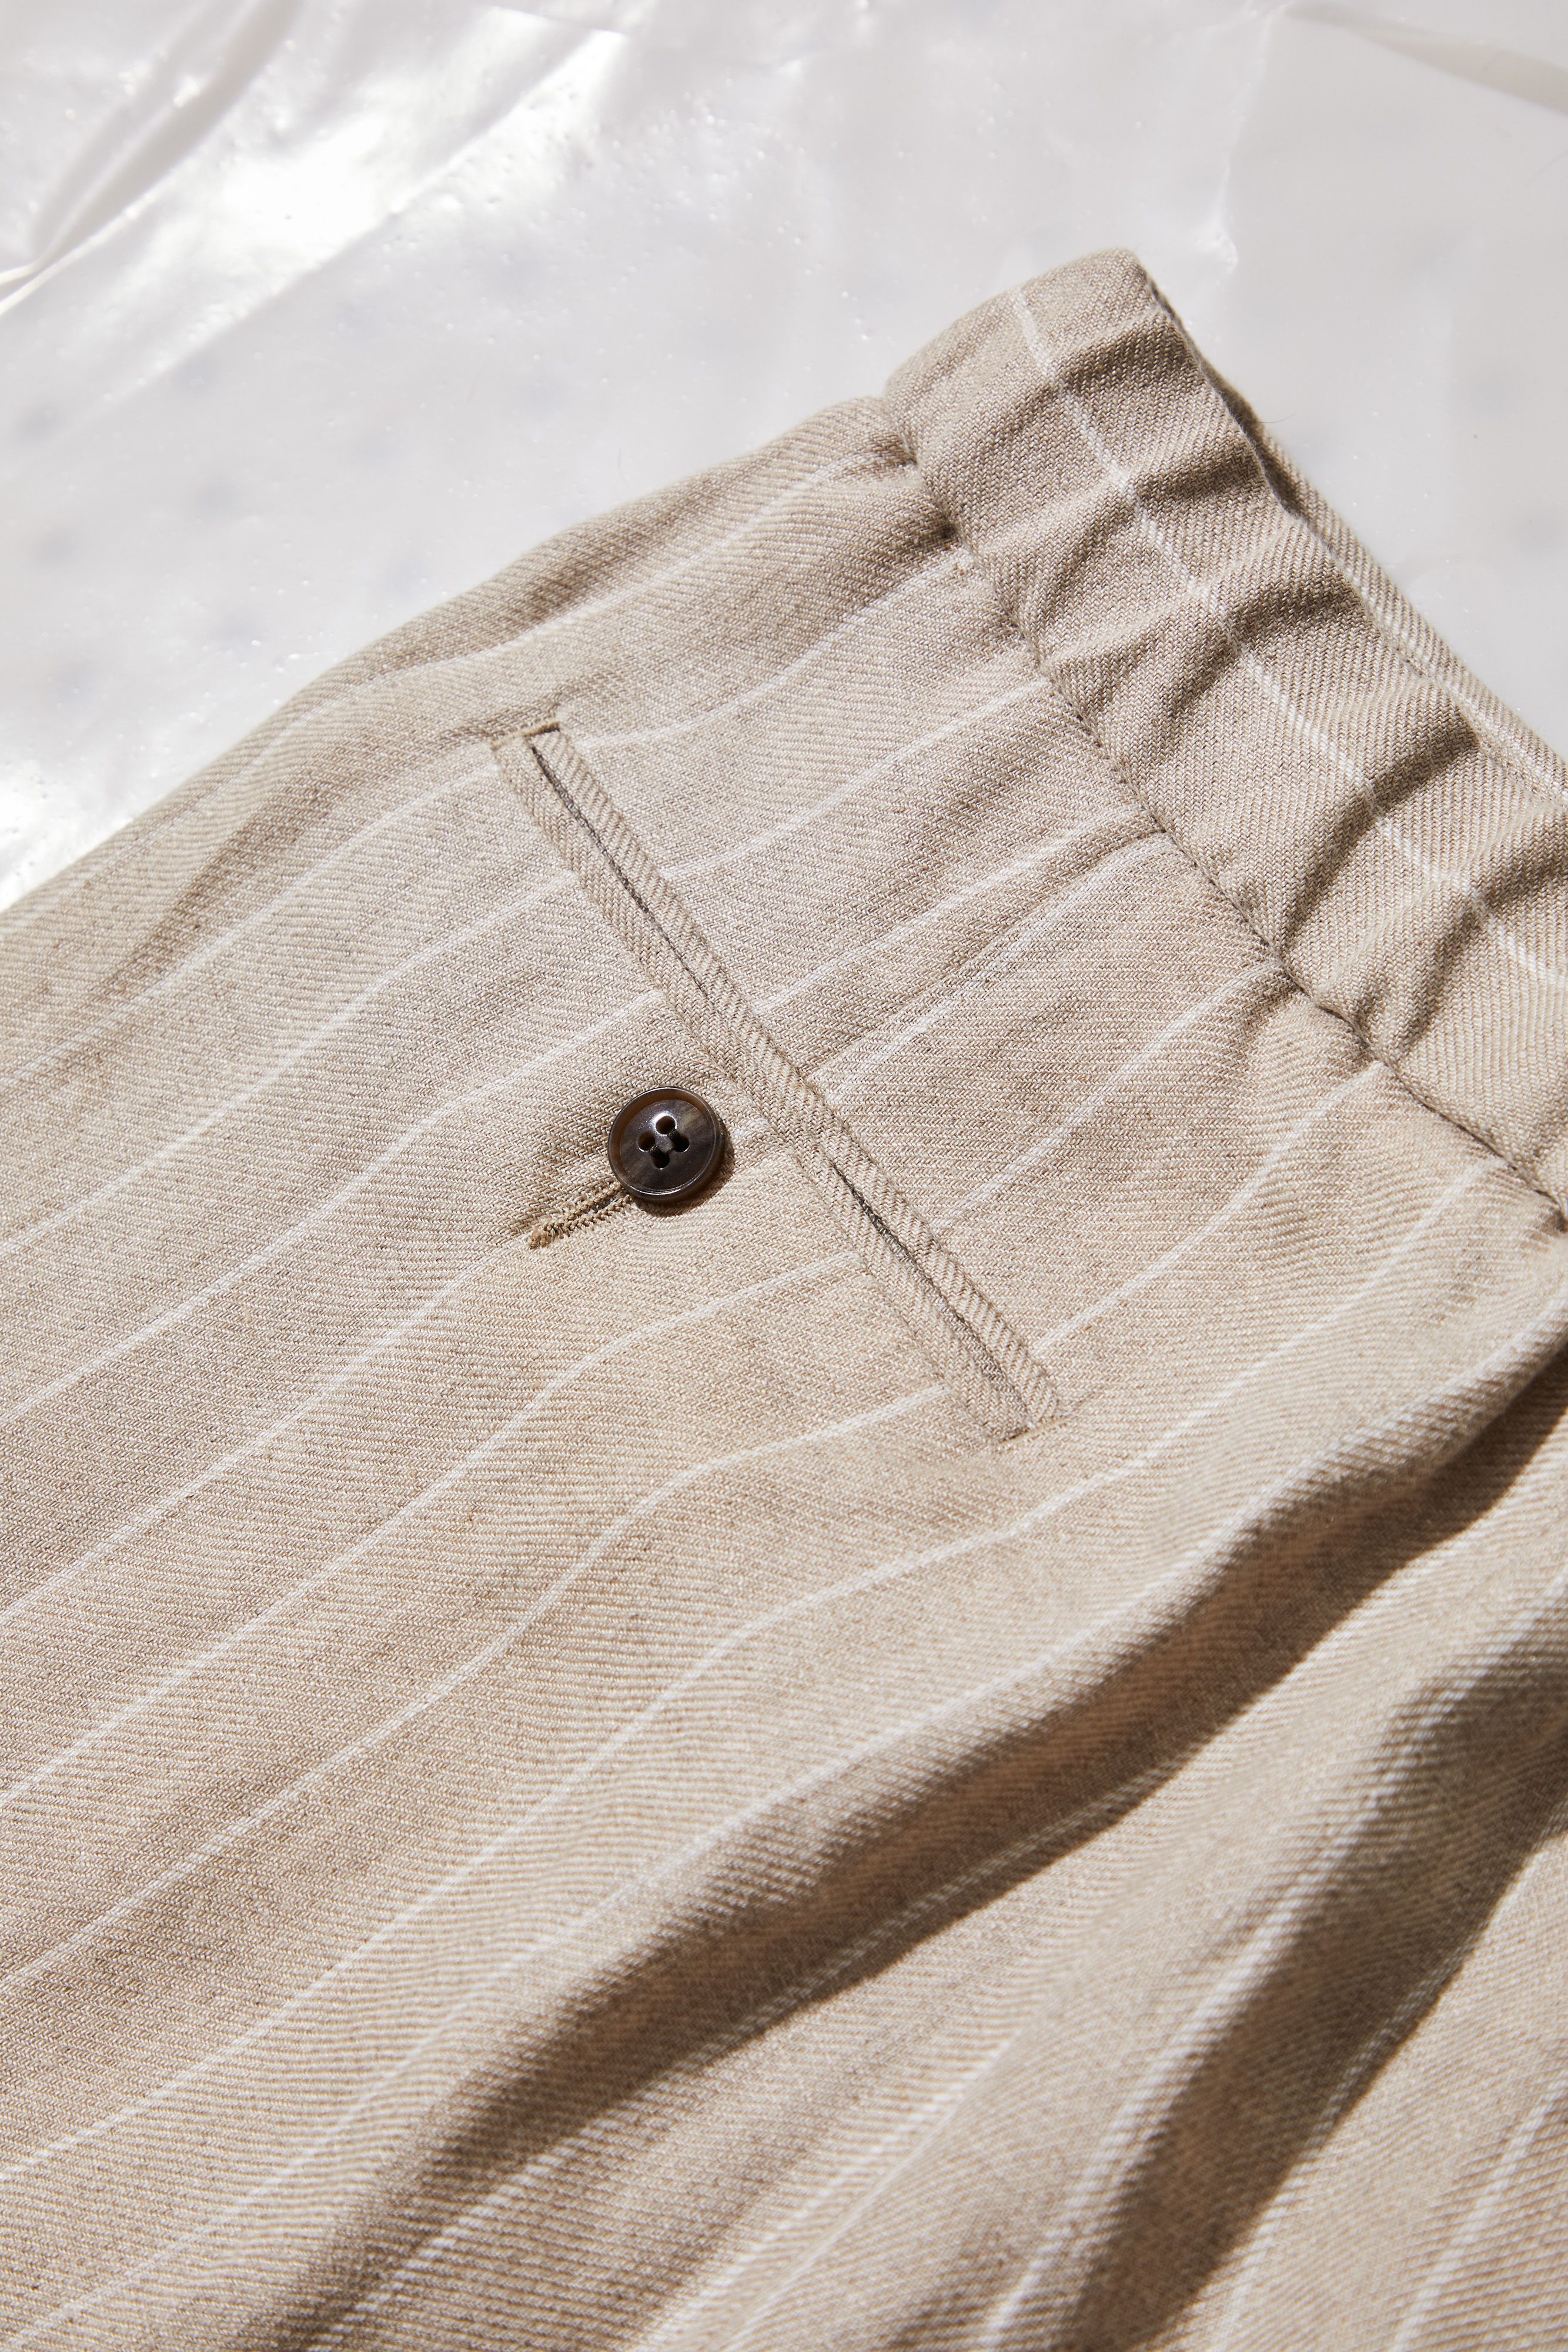 Suitsupply Ames Linen Drawstring Trousers Review and Endorsement